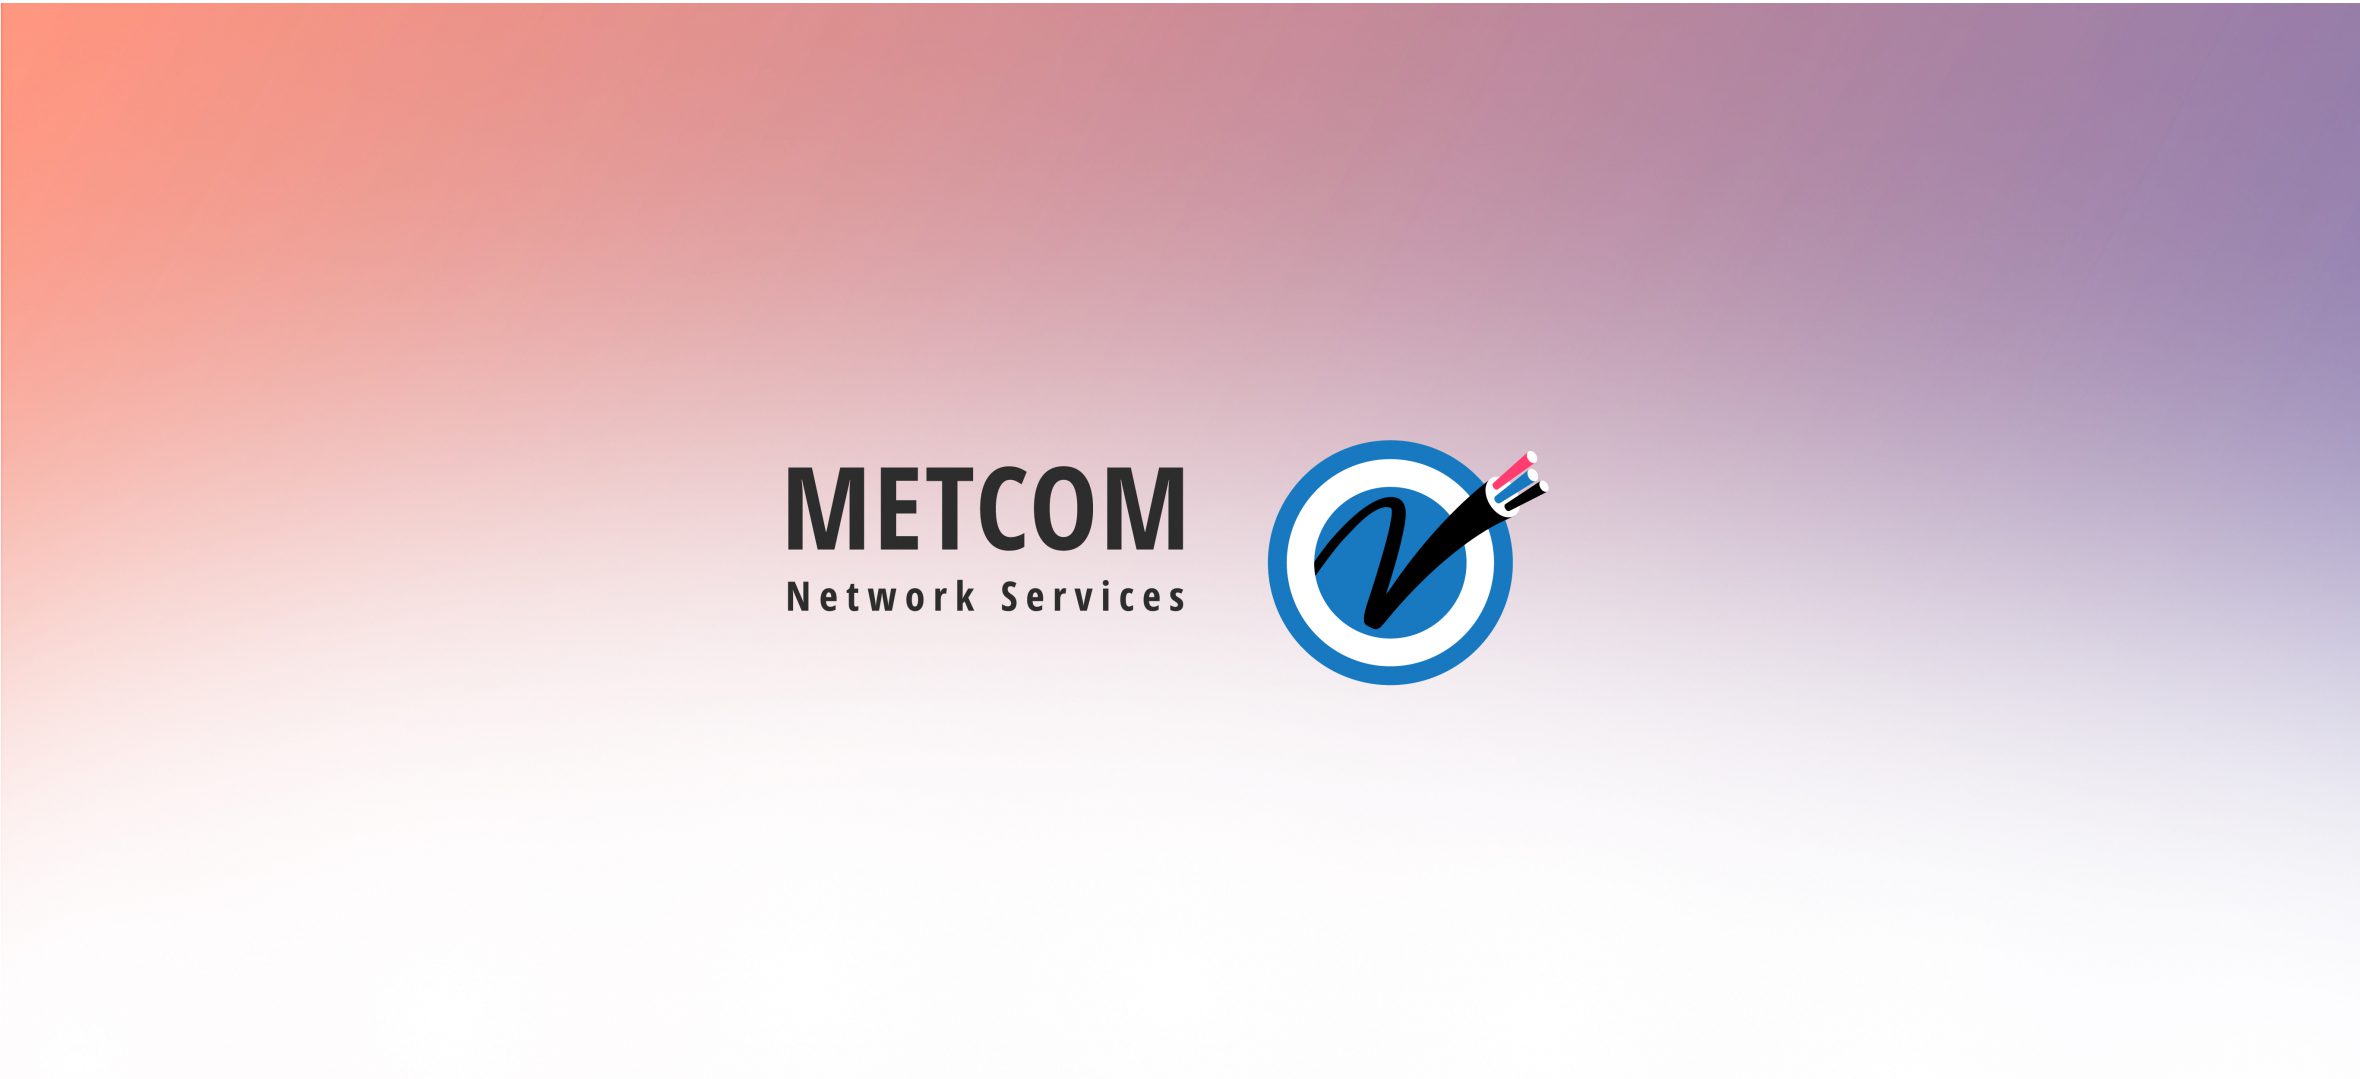 Epsilon Acquires Metcom Network Services to Serve US Demand for Cloud-centric Networking